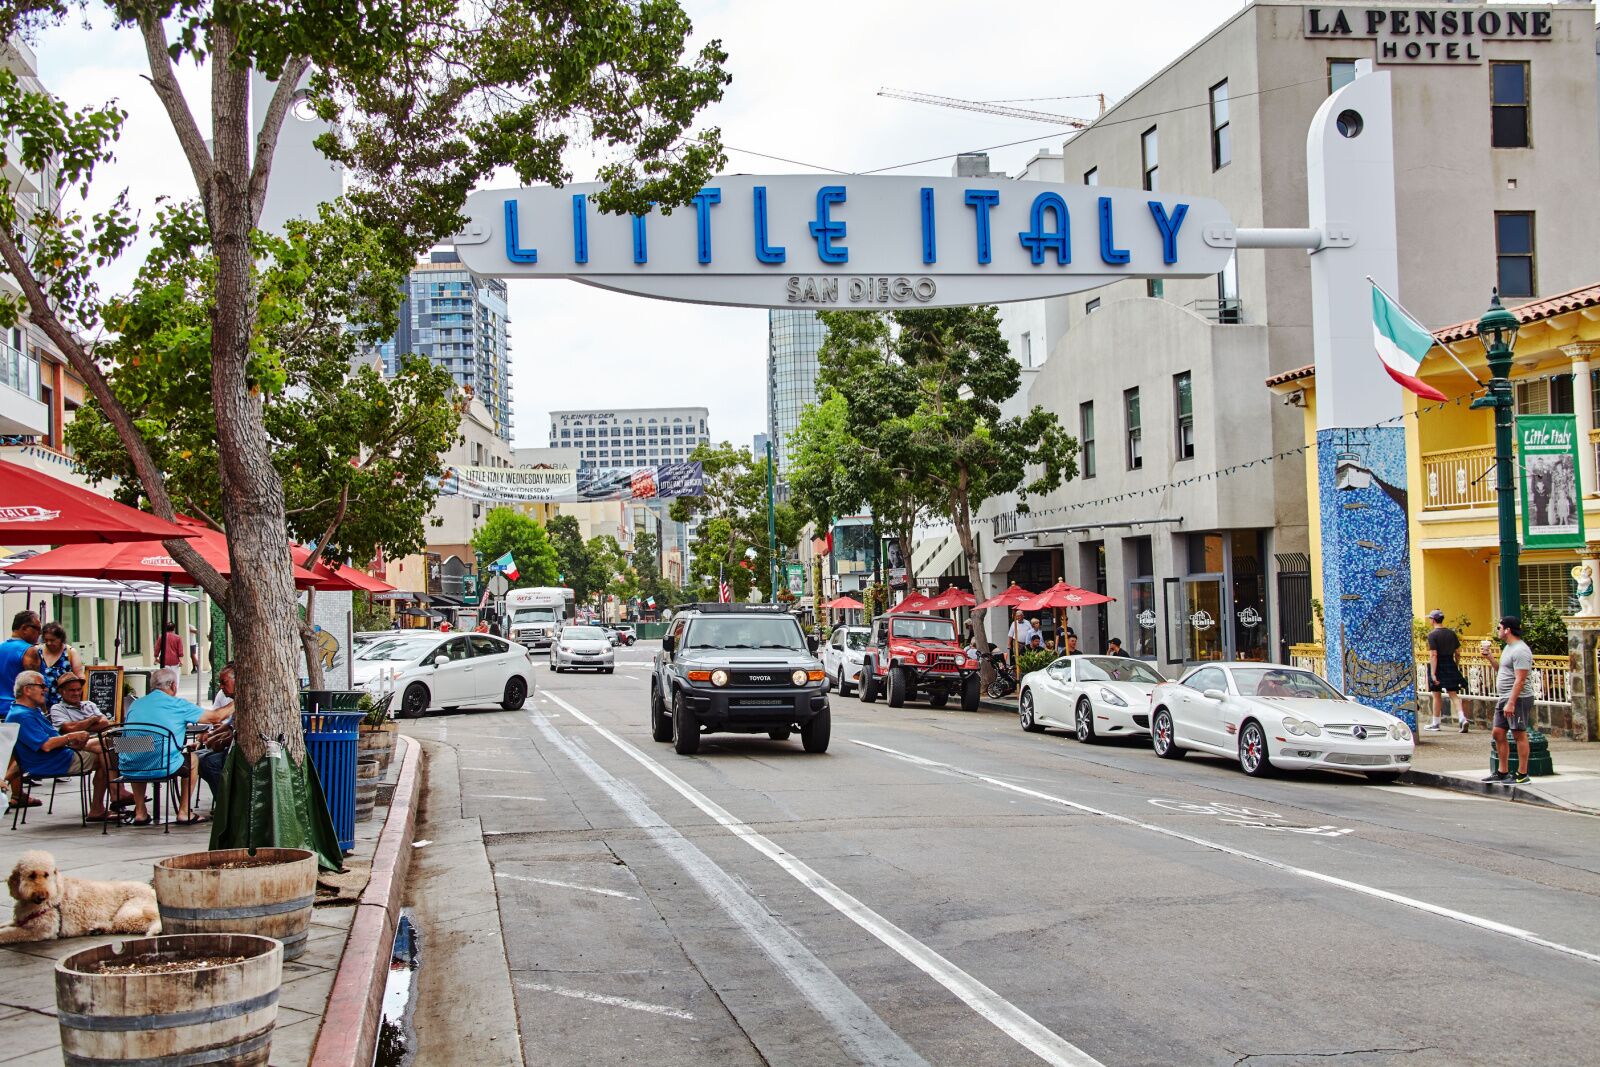 airbnbs in downtown san diego - little italy sign